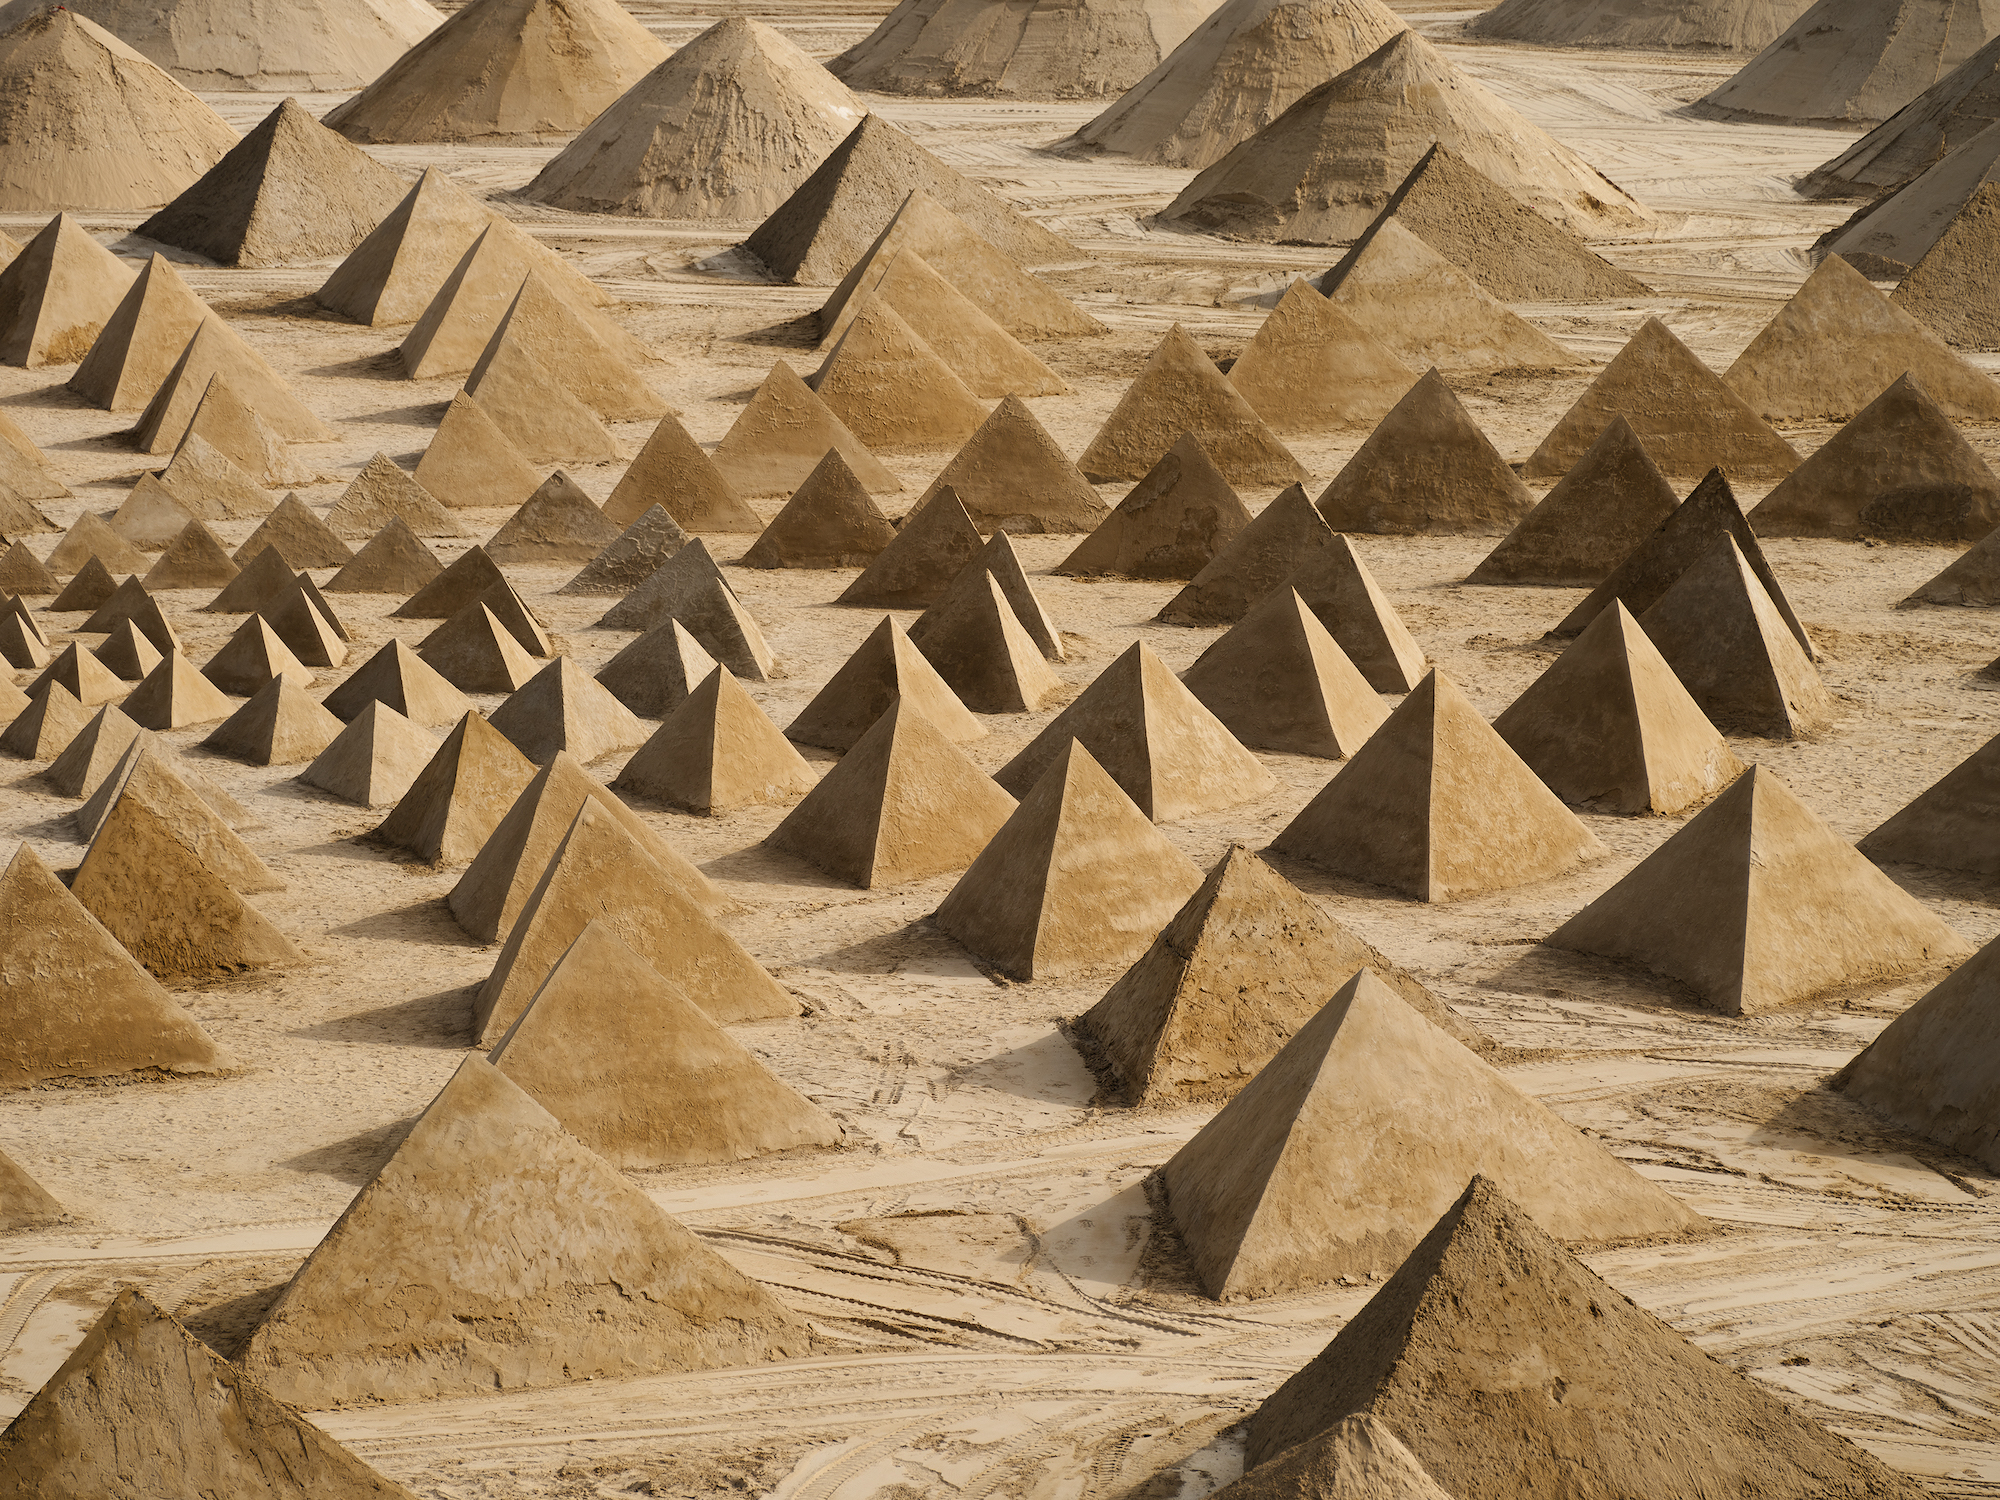 Numerous sand pyramids in a geometric pattern.